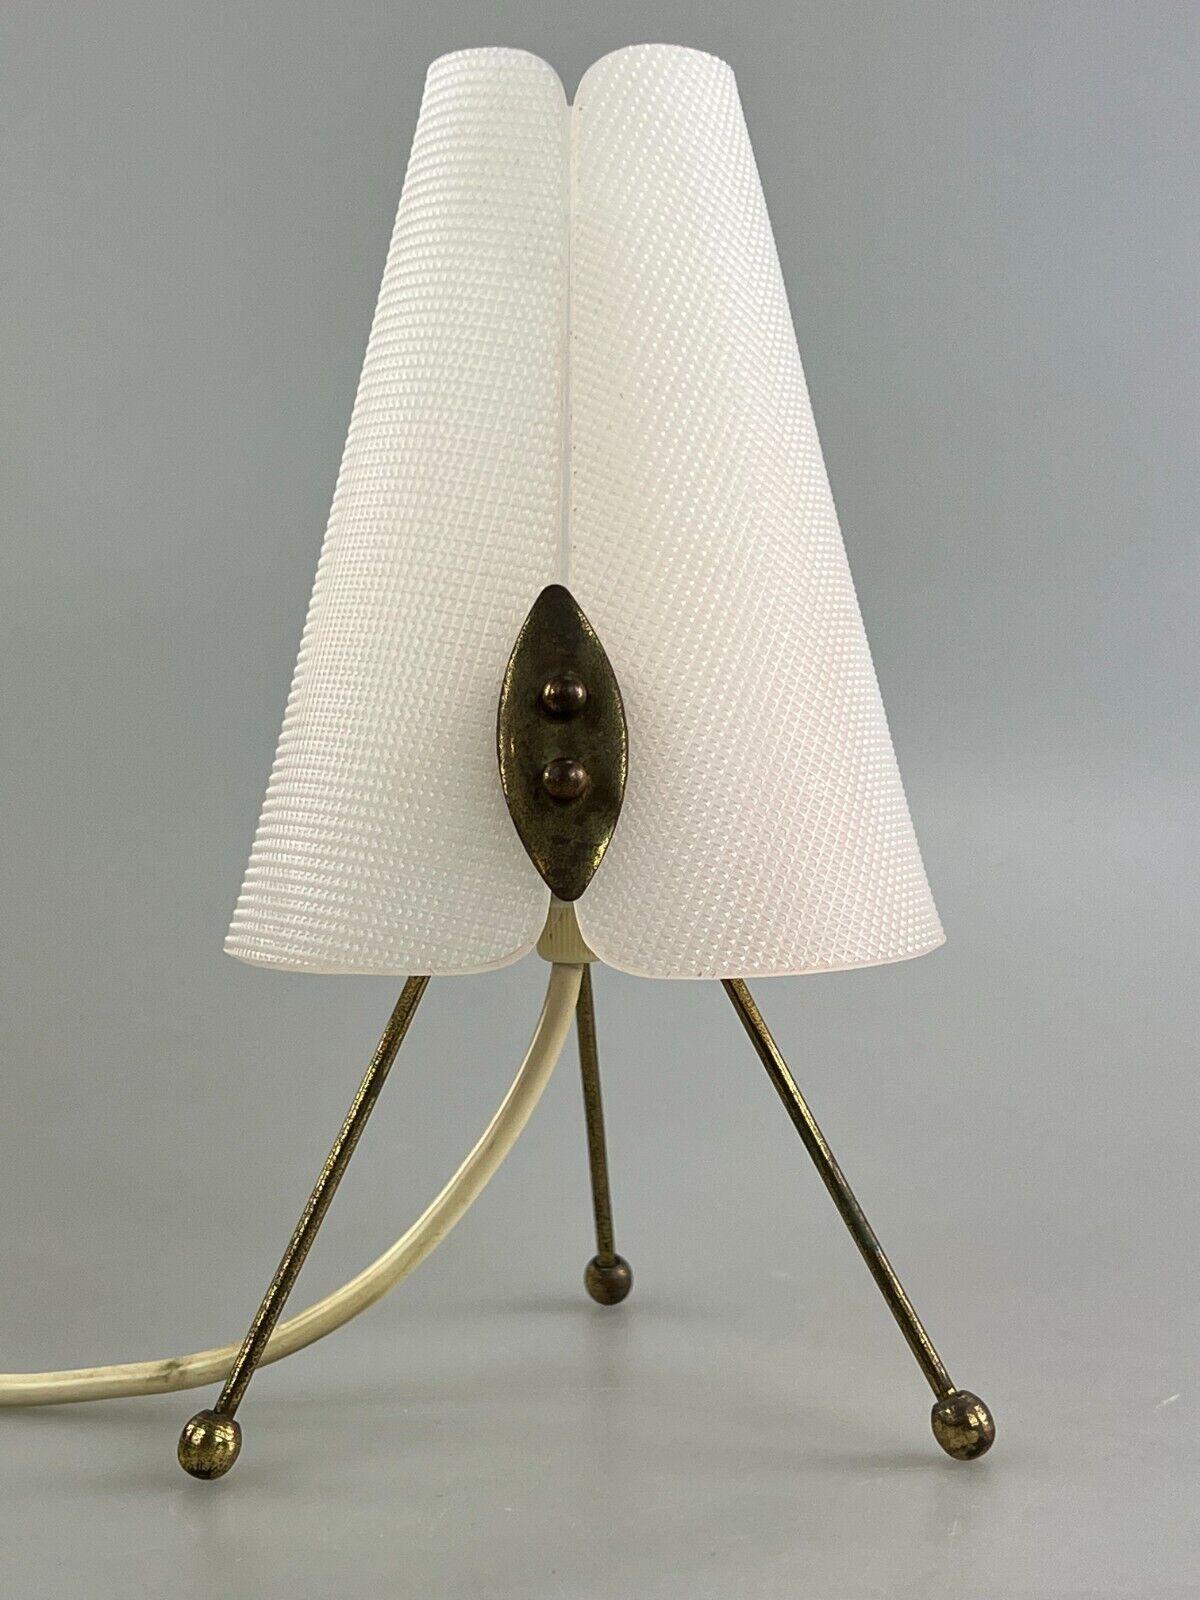 German 60s 70s Tripod Lamp Acrylic Table Lamp Bedside Lamp Space Age Design